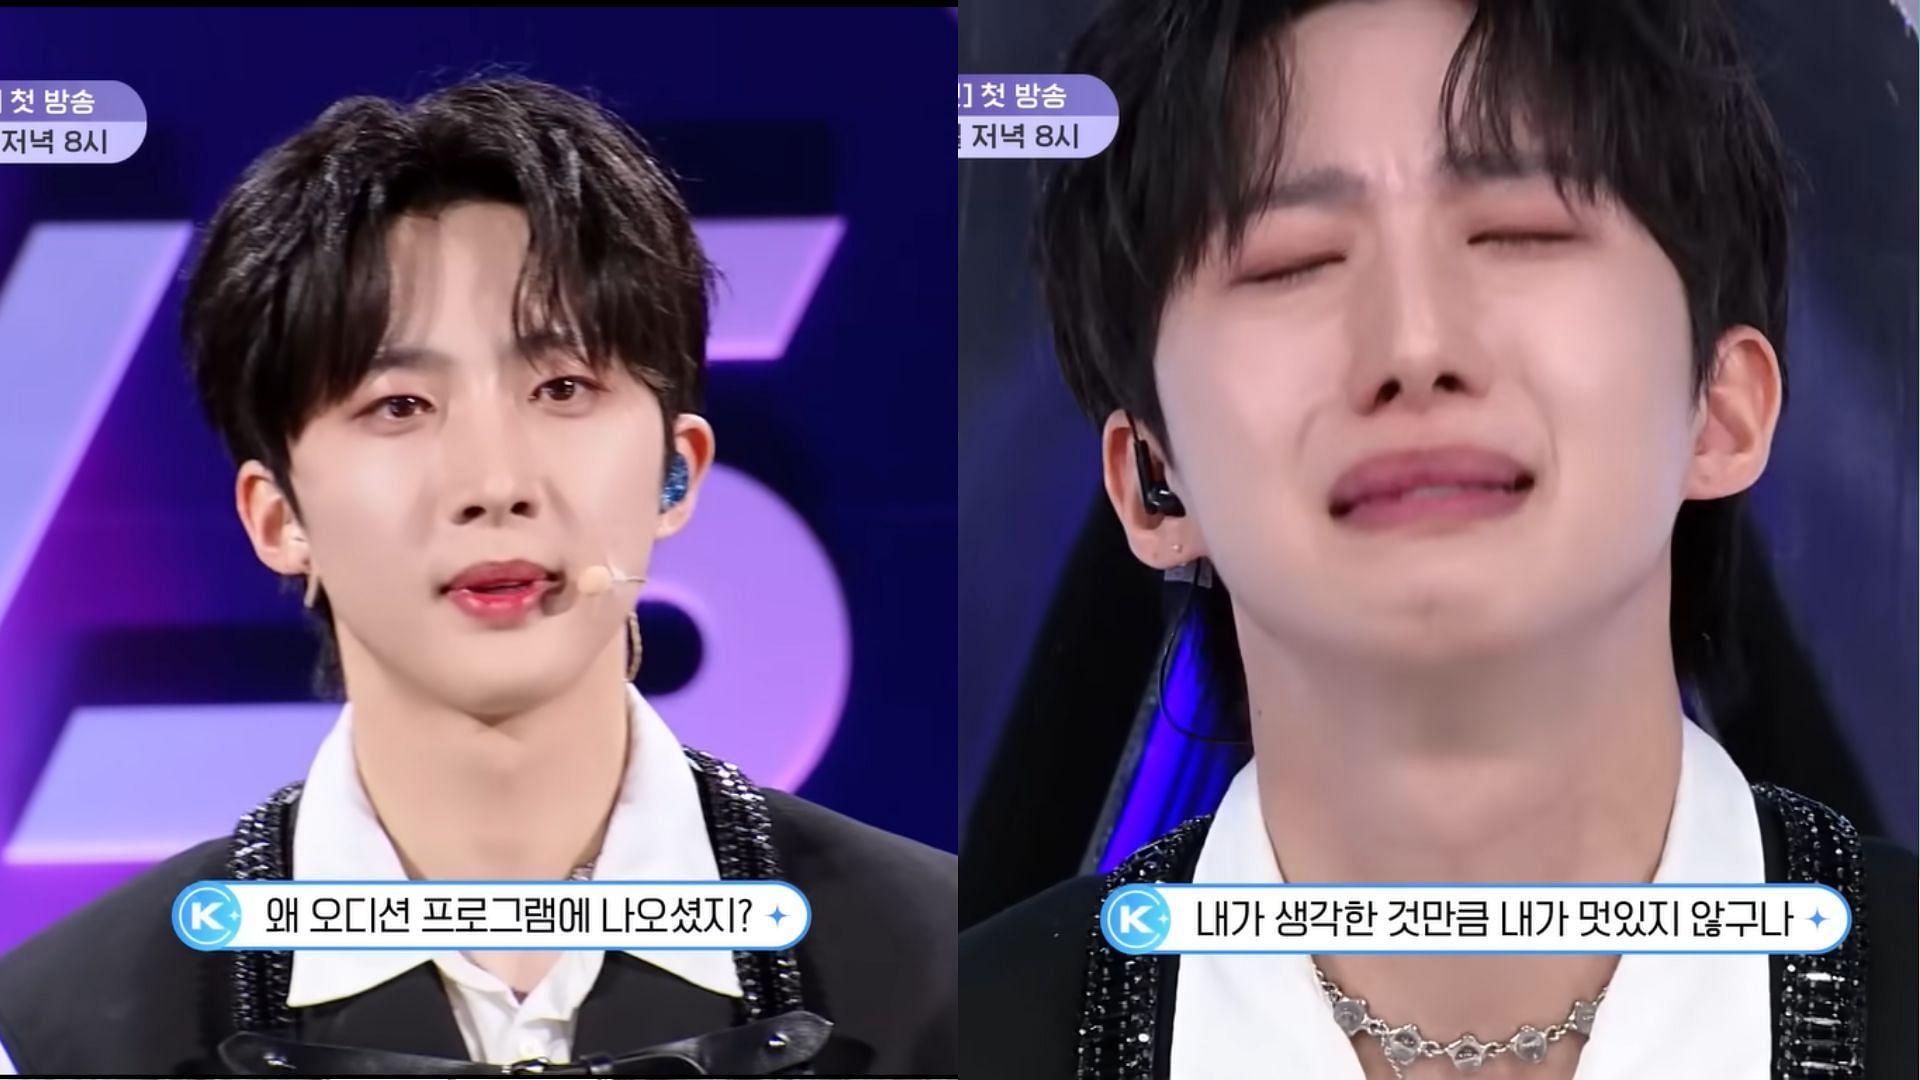 Fans furious over Mnet allegedly evil editing PENTAGON